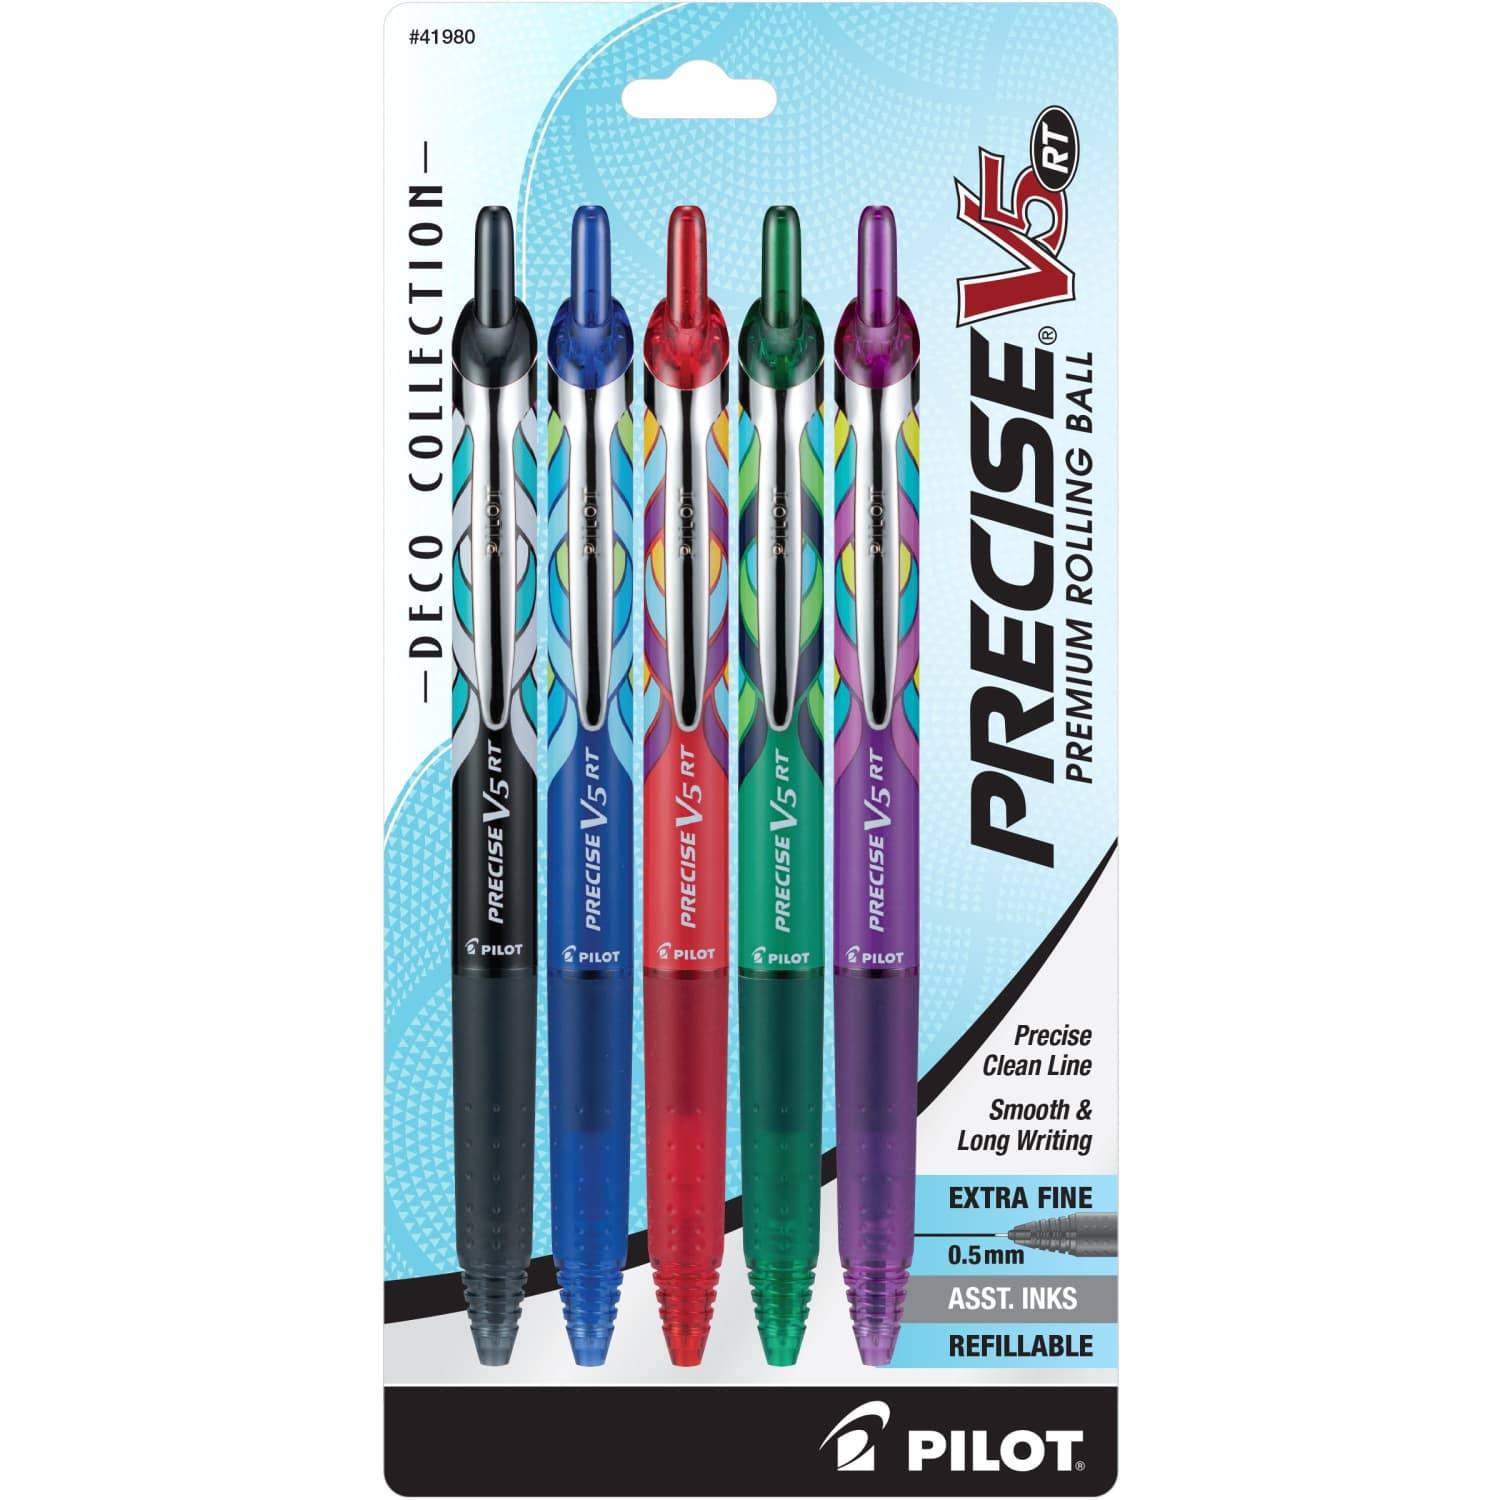 A pack of our favorite rollerball pens to take notes with